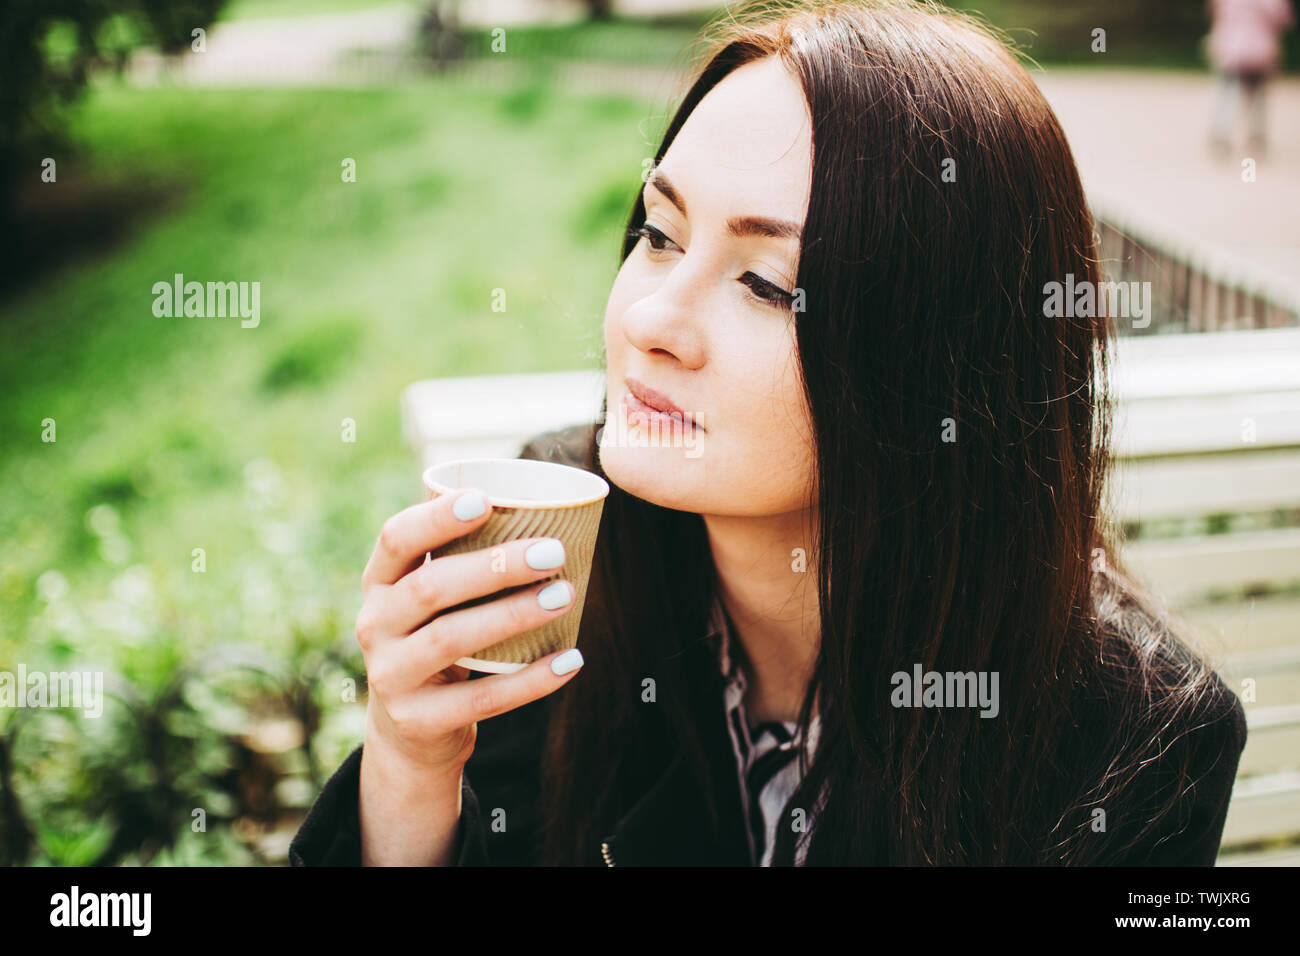 Cute smiling brunette holding a cup of coffee and smelling the aroma. Charming business woman sitting on a bench in a park. Stock Photo